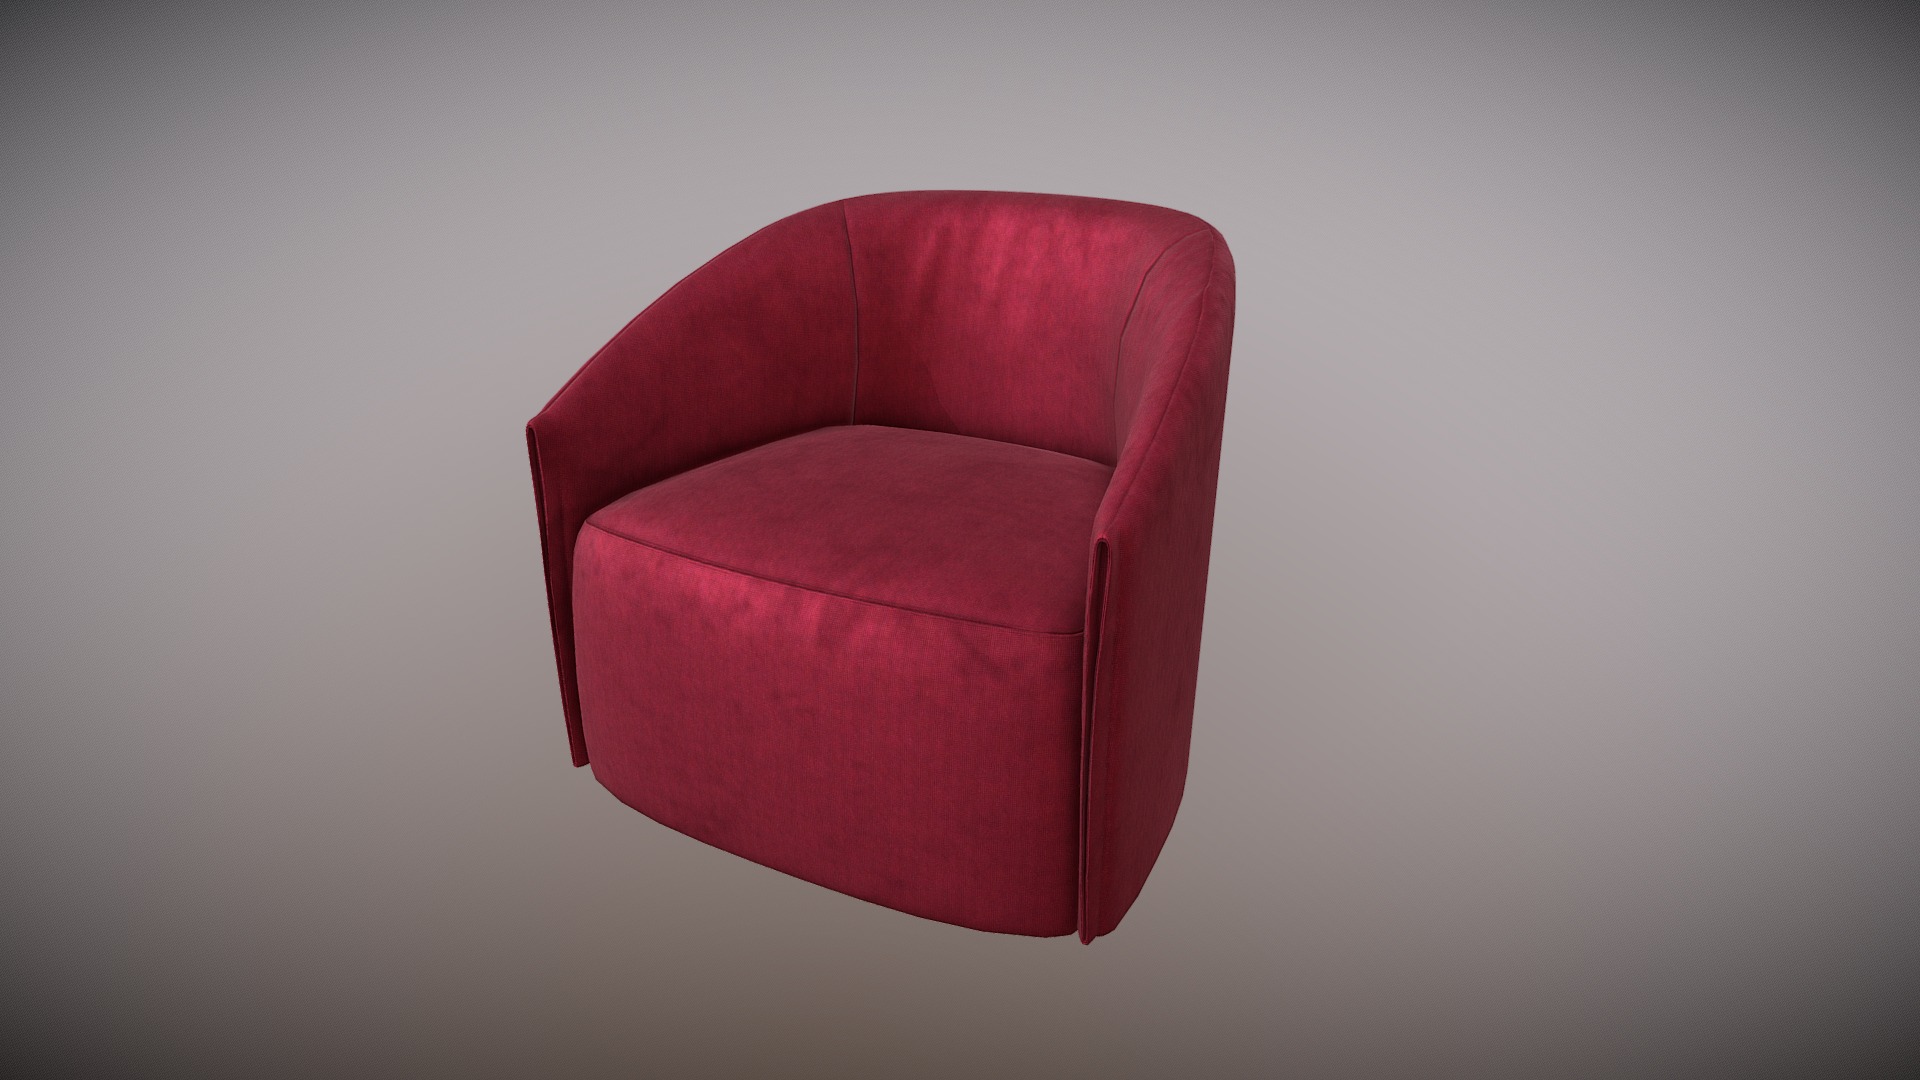 3D model Swivel Chair Velvet - This is a 3D model of the Swivel Chair Velvet. The 3D model is about a red chair on a white background.